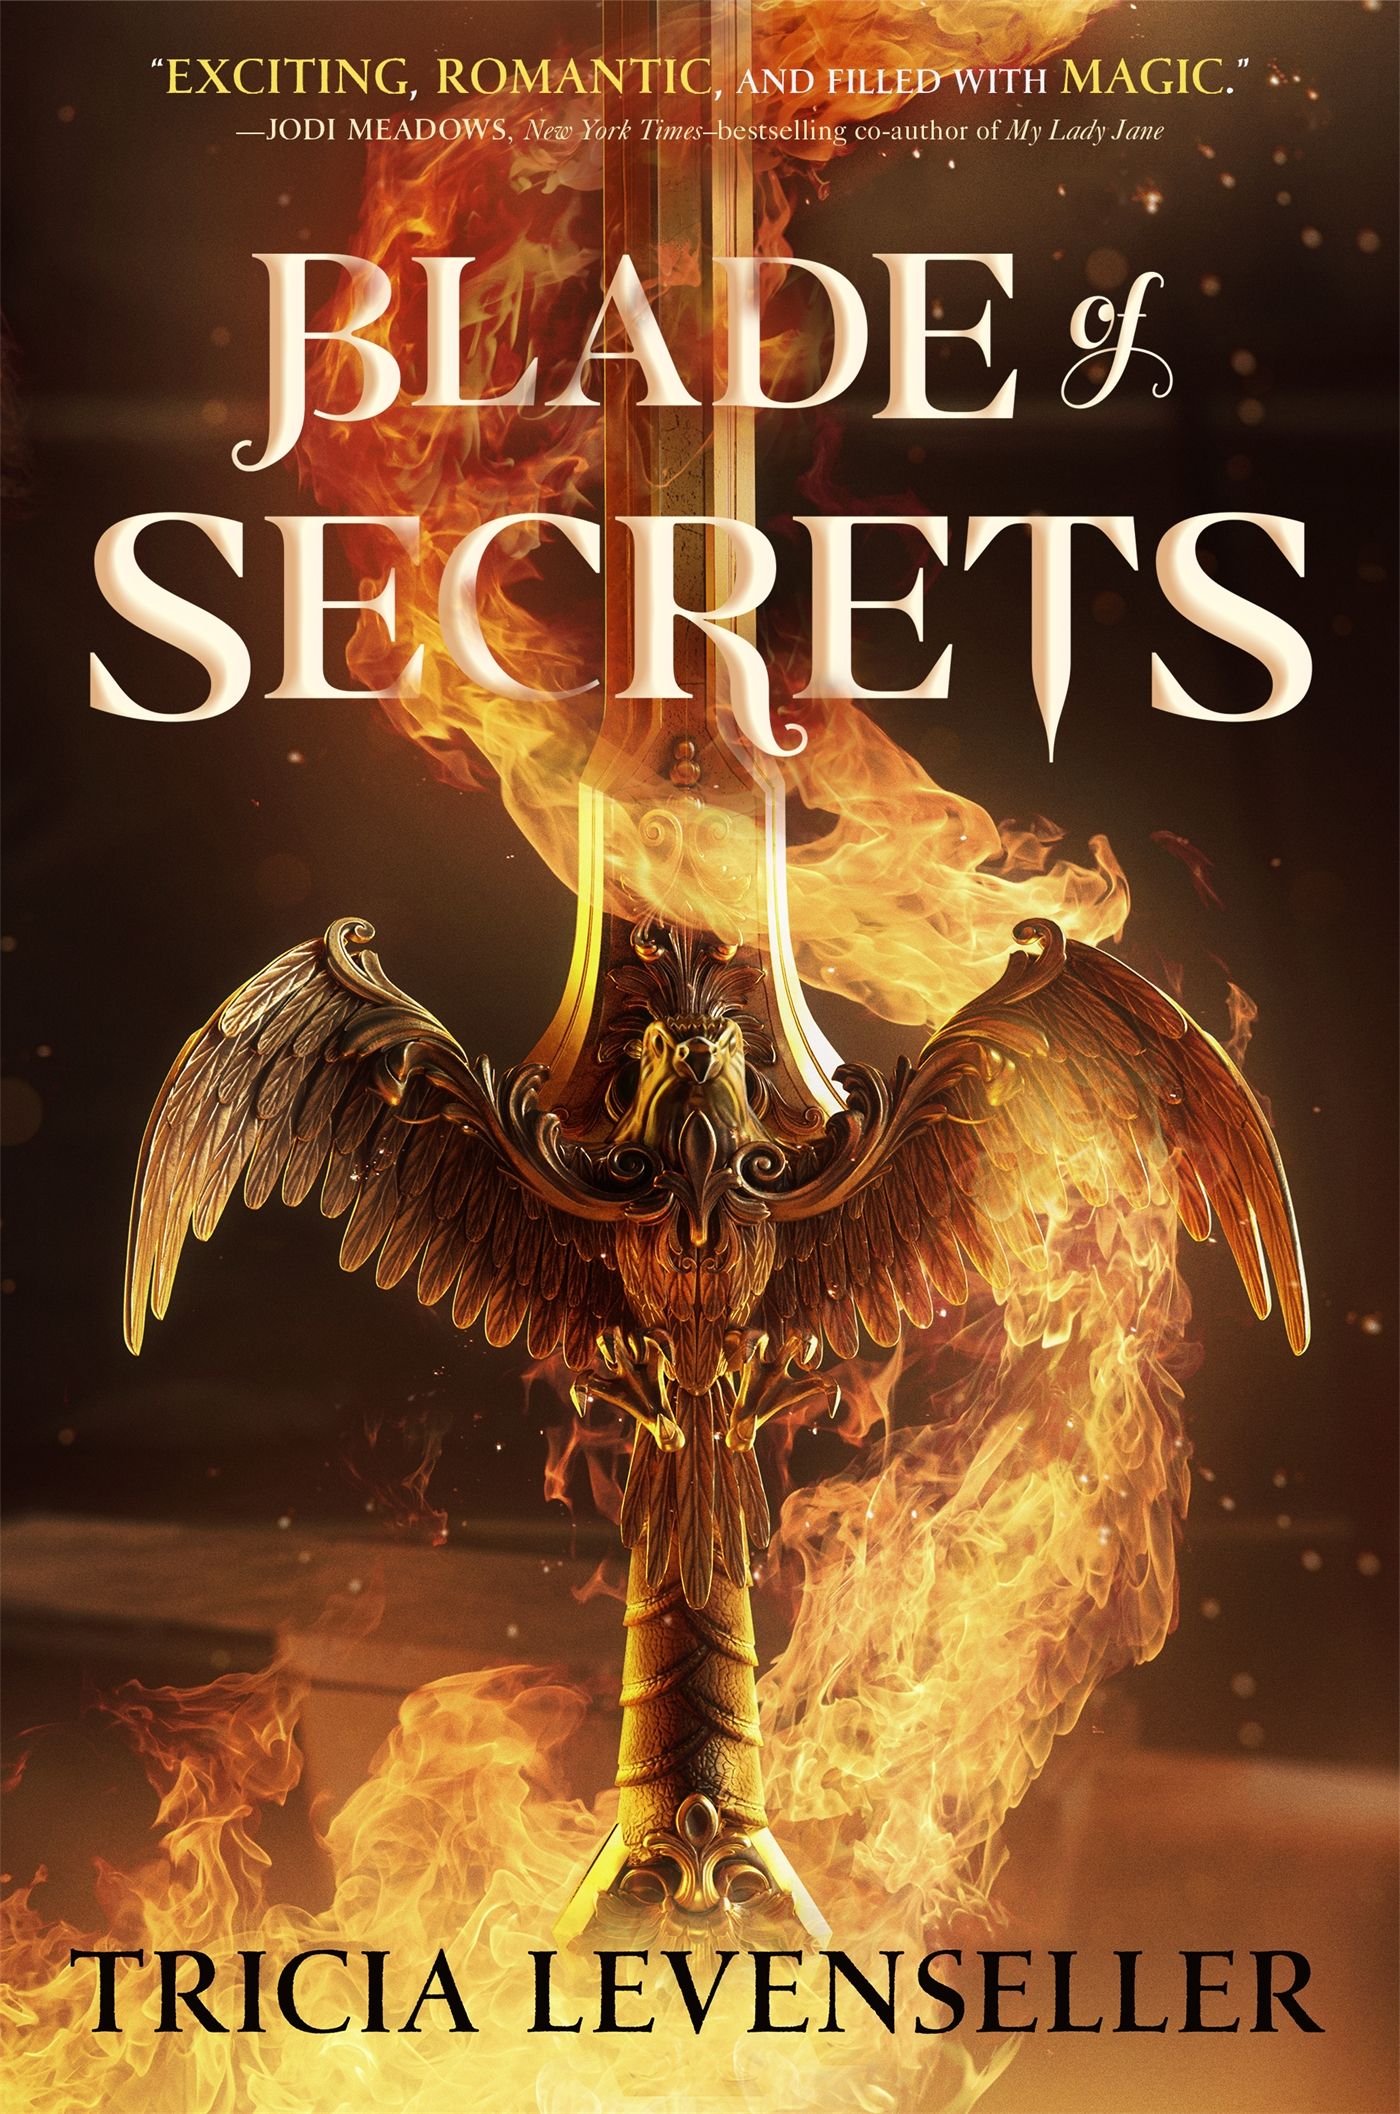 Book cover of Blade of Secrets by Tricia Levenseller